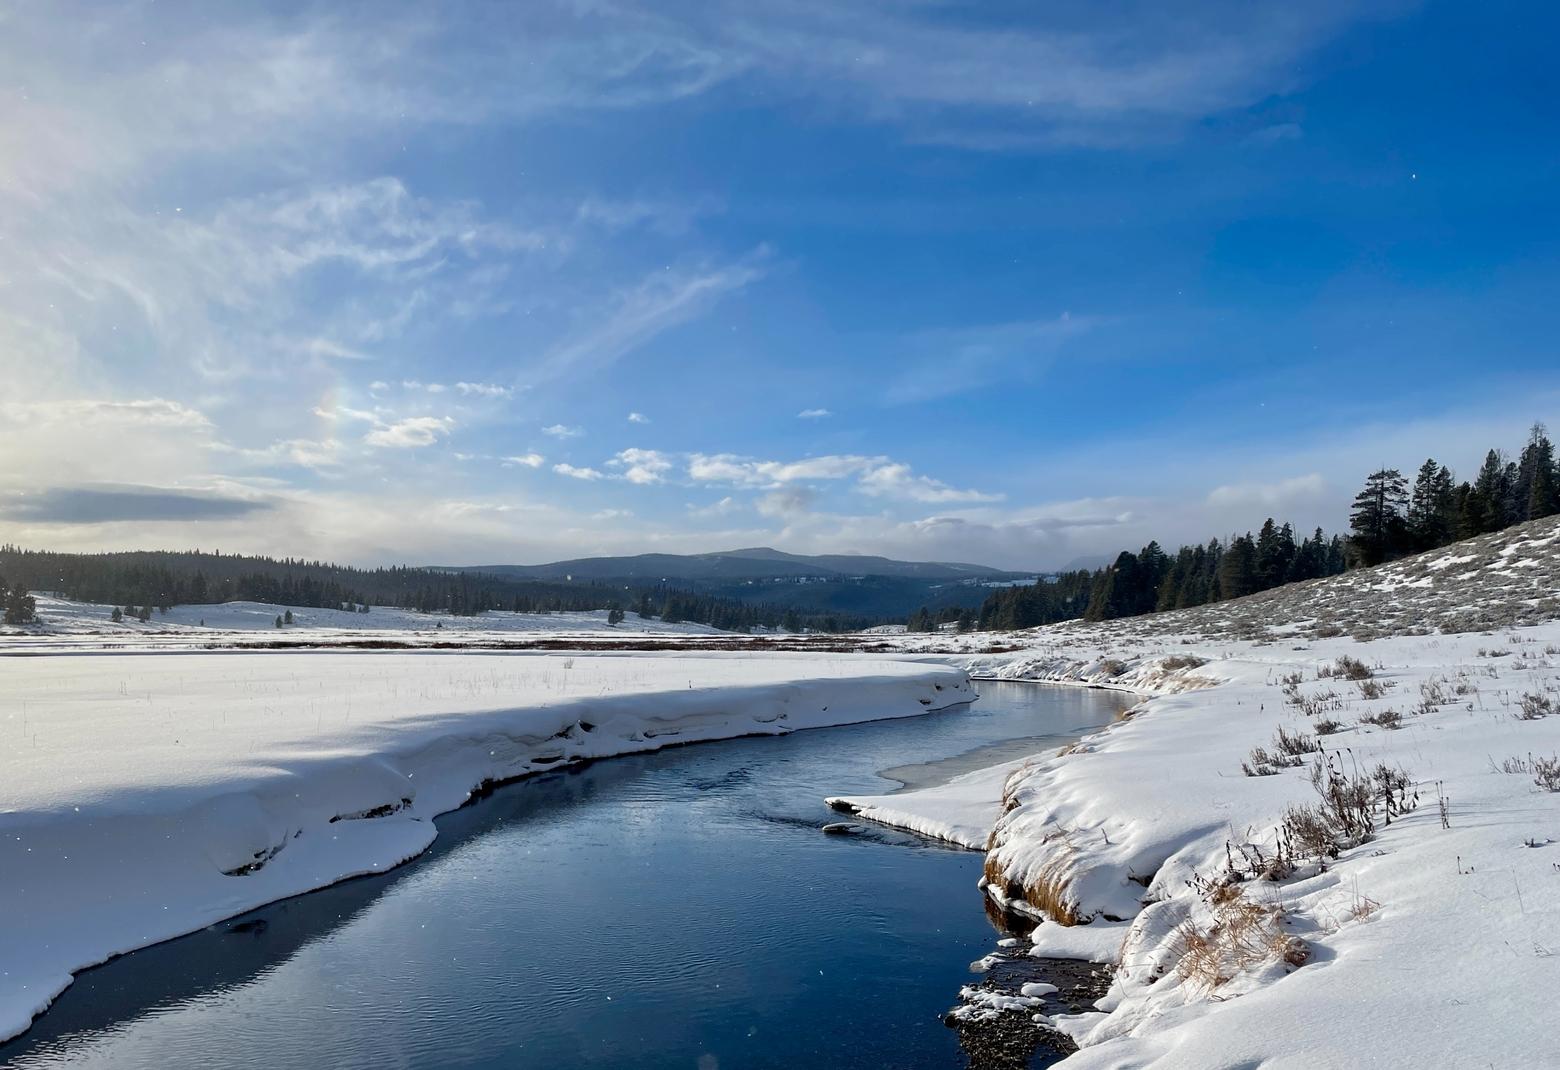 The Gallatin River as it meanders out of Yellowstone National Park. As of January 23, the Gallatin River watershed was at 62 percent of average snow-water equivalent and upper river sections remained ice-free. Photo by David Tucker